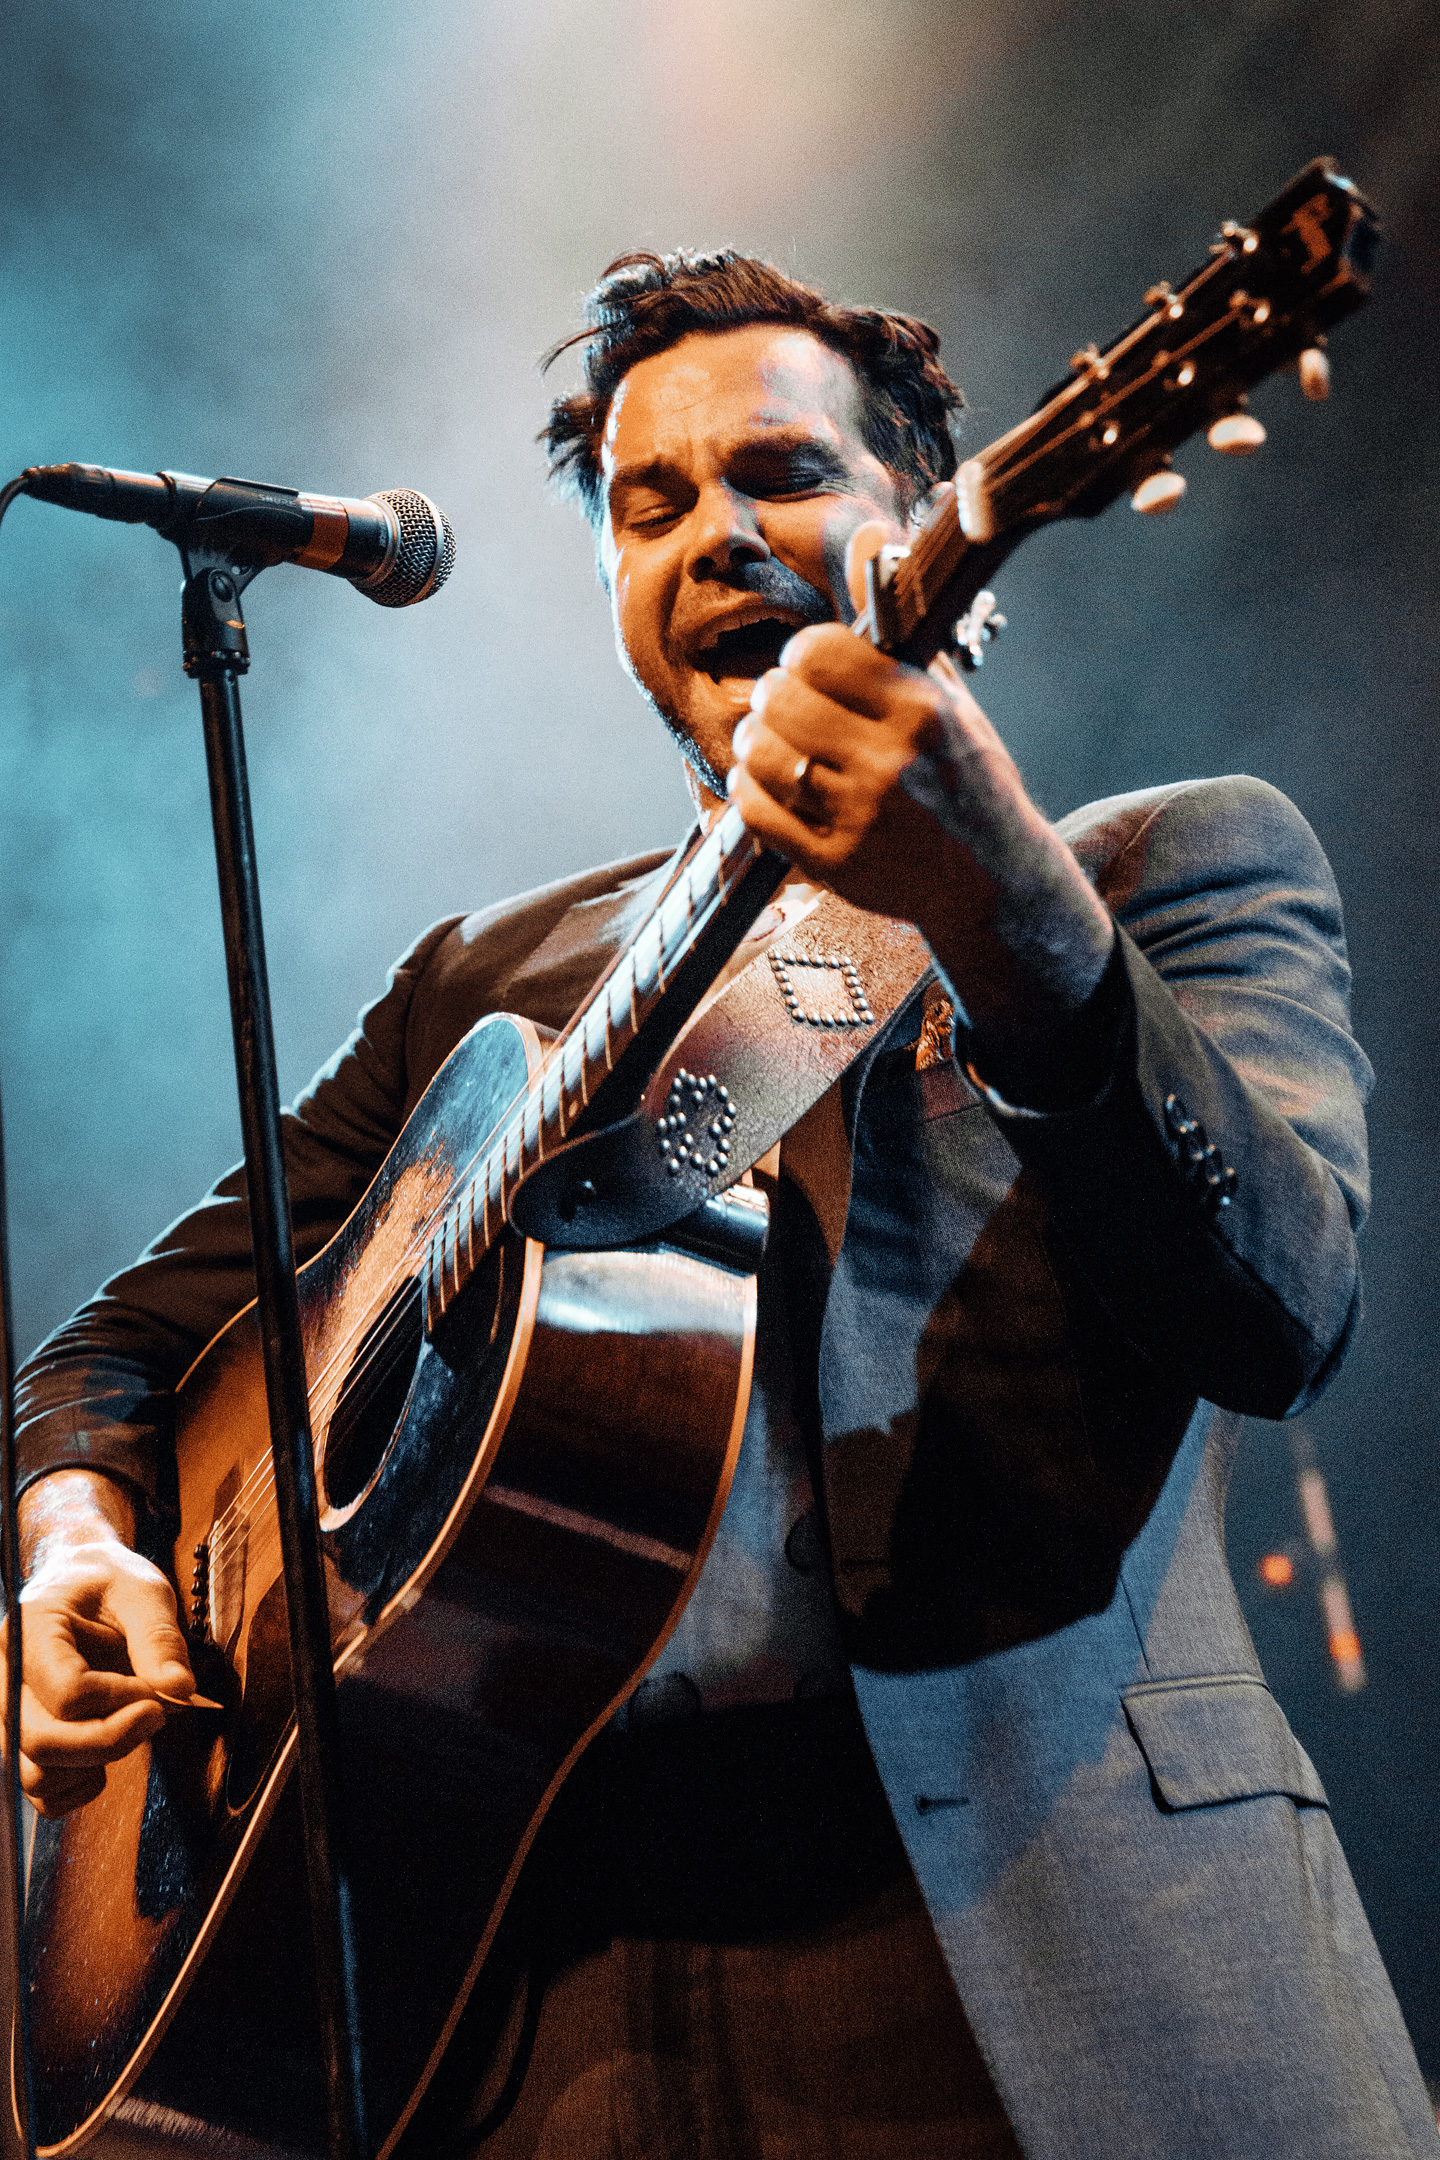 The Lone Bellow - Photos from Gothic Theatre Denver